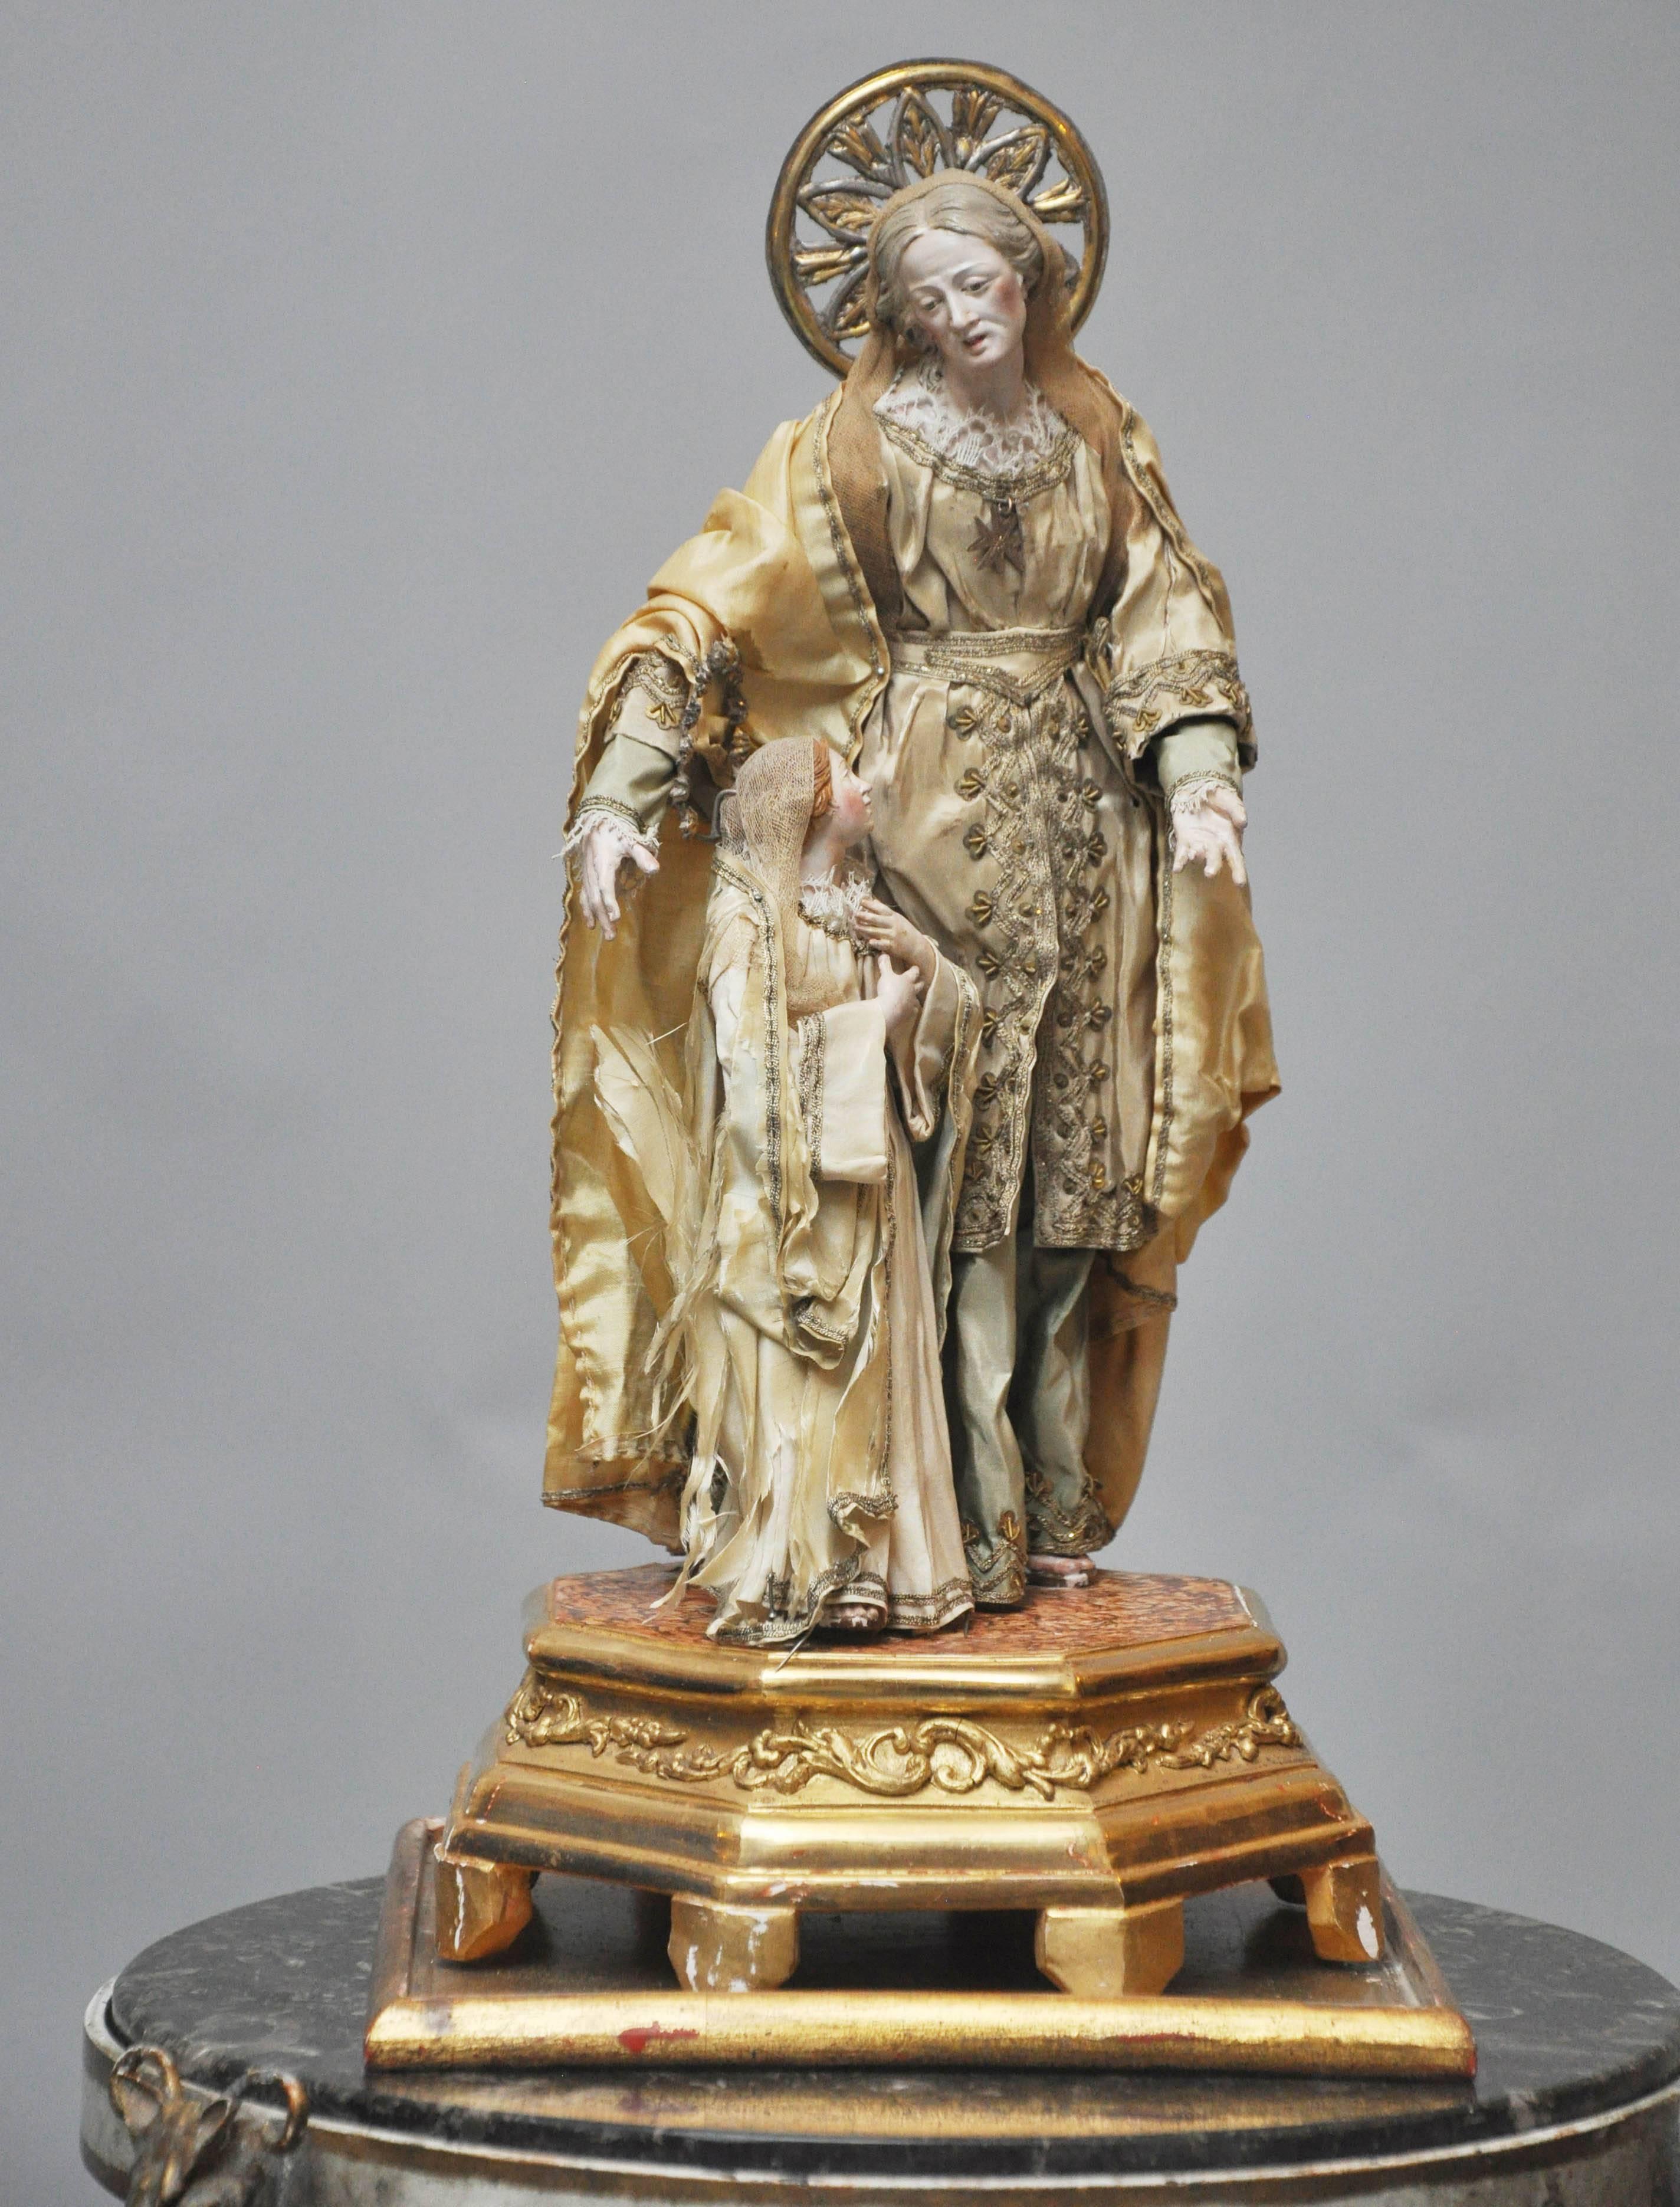 18th Century carved gesso statue depicting  St. Anne with young Mary, the little girl who would grow up to become the mother of Jesus.  Intricately carved figures draped with silk garments, supported on a shapely gilt octagon pedestal  resting on a